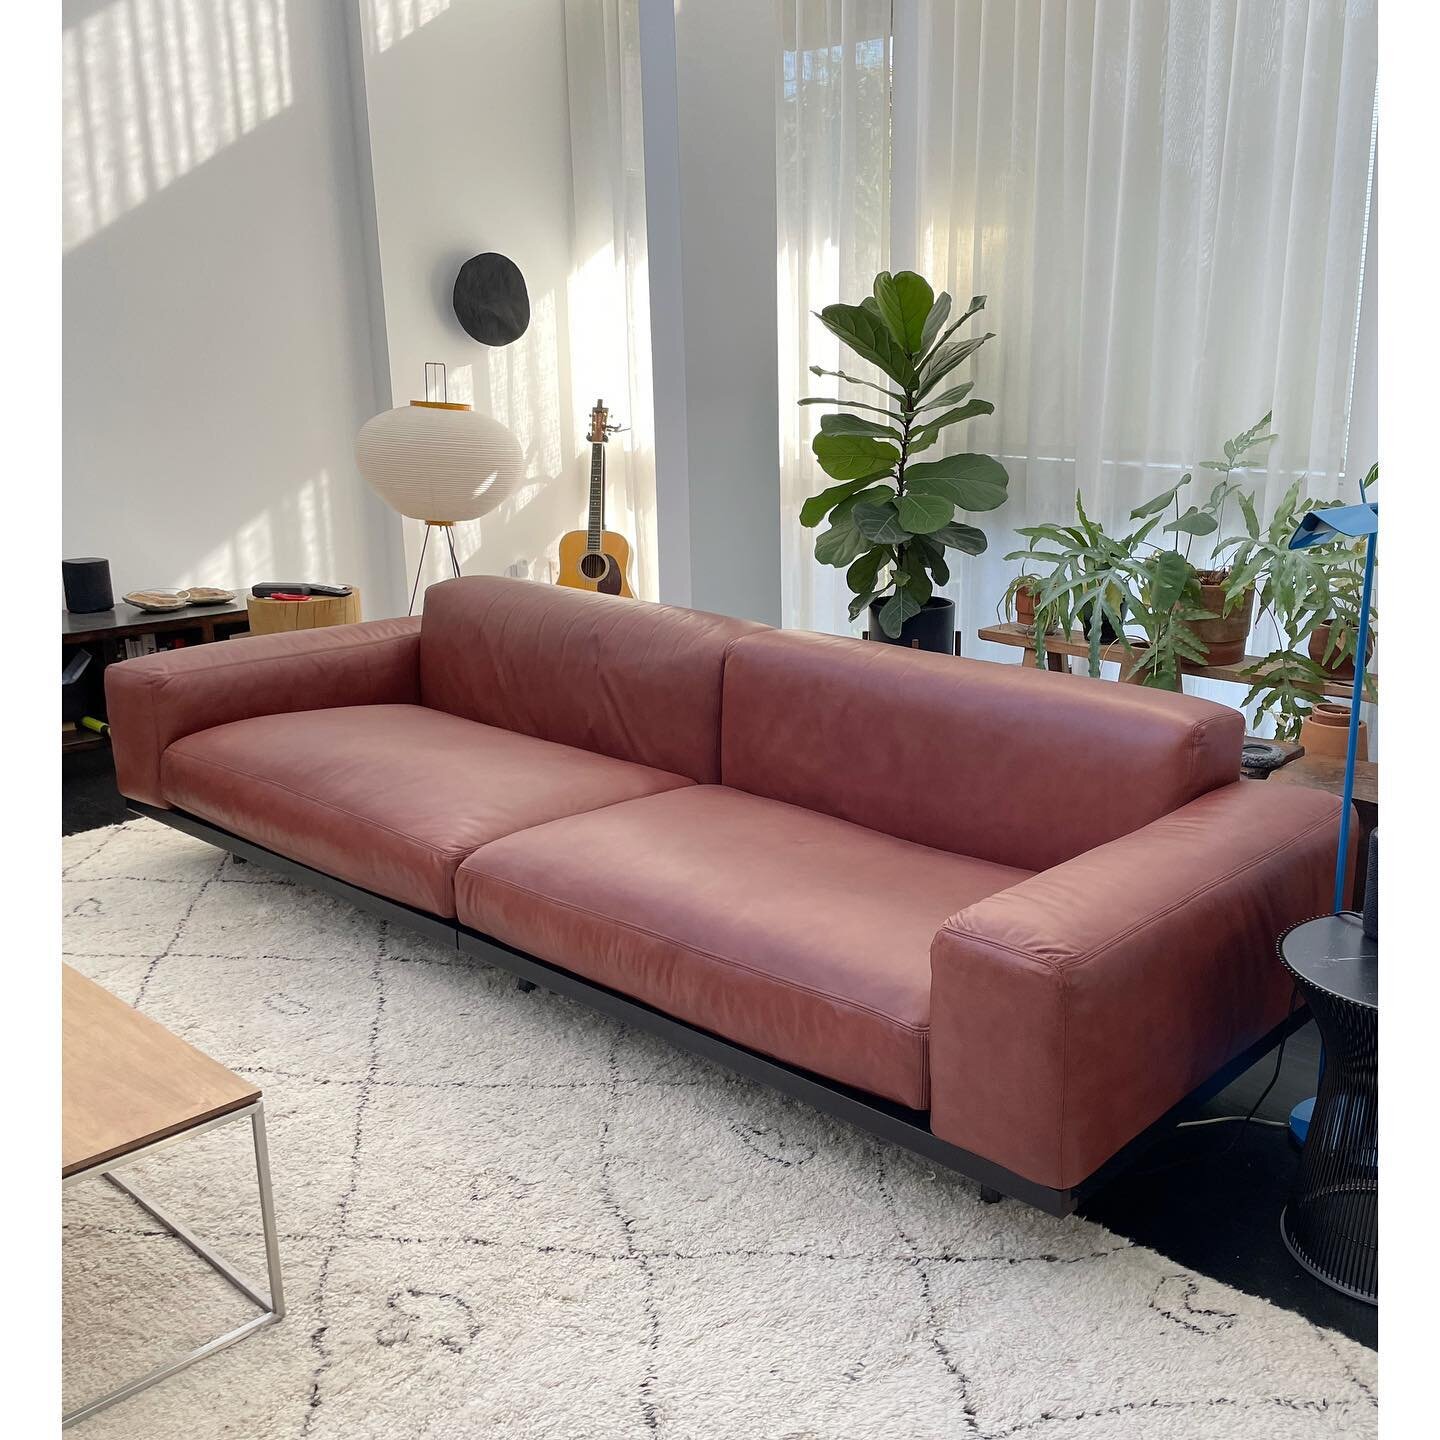 Check out the wonderful sofa that we recently restored , right at home in this elegantly designed space ! 

#leatherrestoration #interiordesign #moderndesign #houstoninteriordesign #leatherupholstery #leatherfurnituredesign #houstonfurniturerepairsho